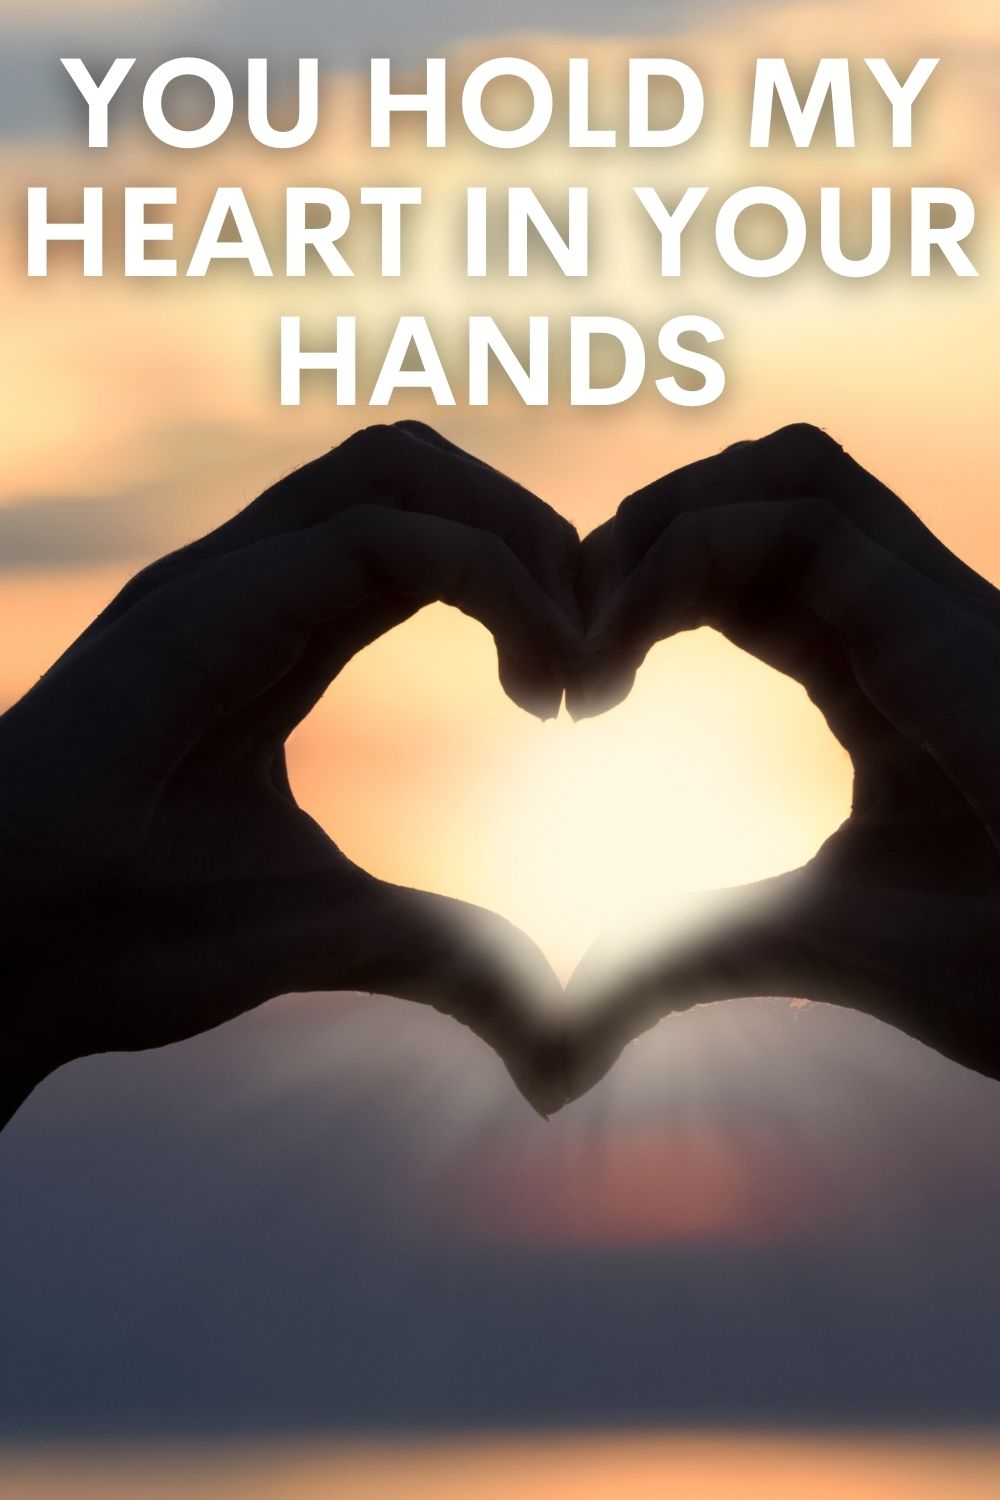 You hold my heart in your hands